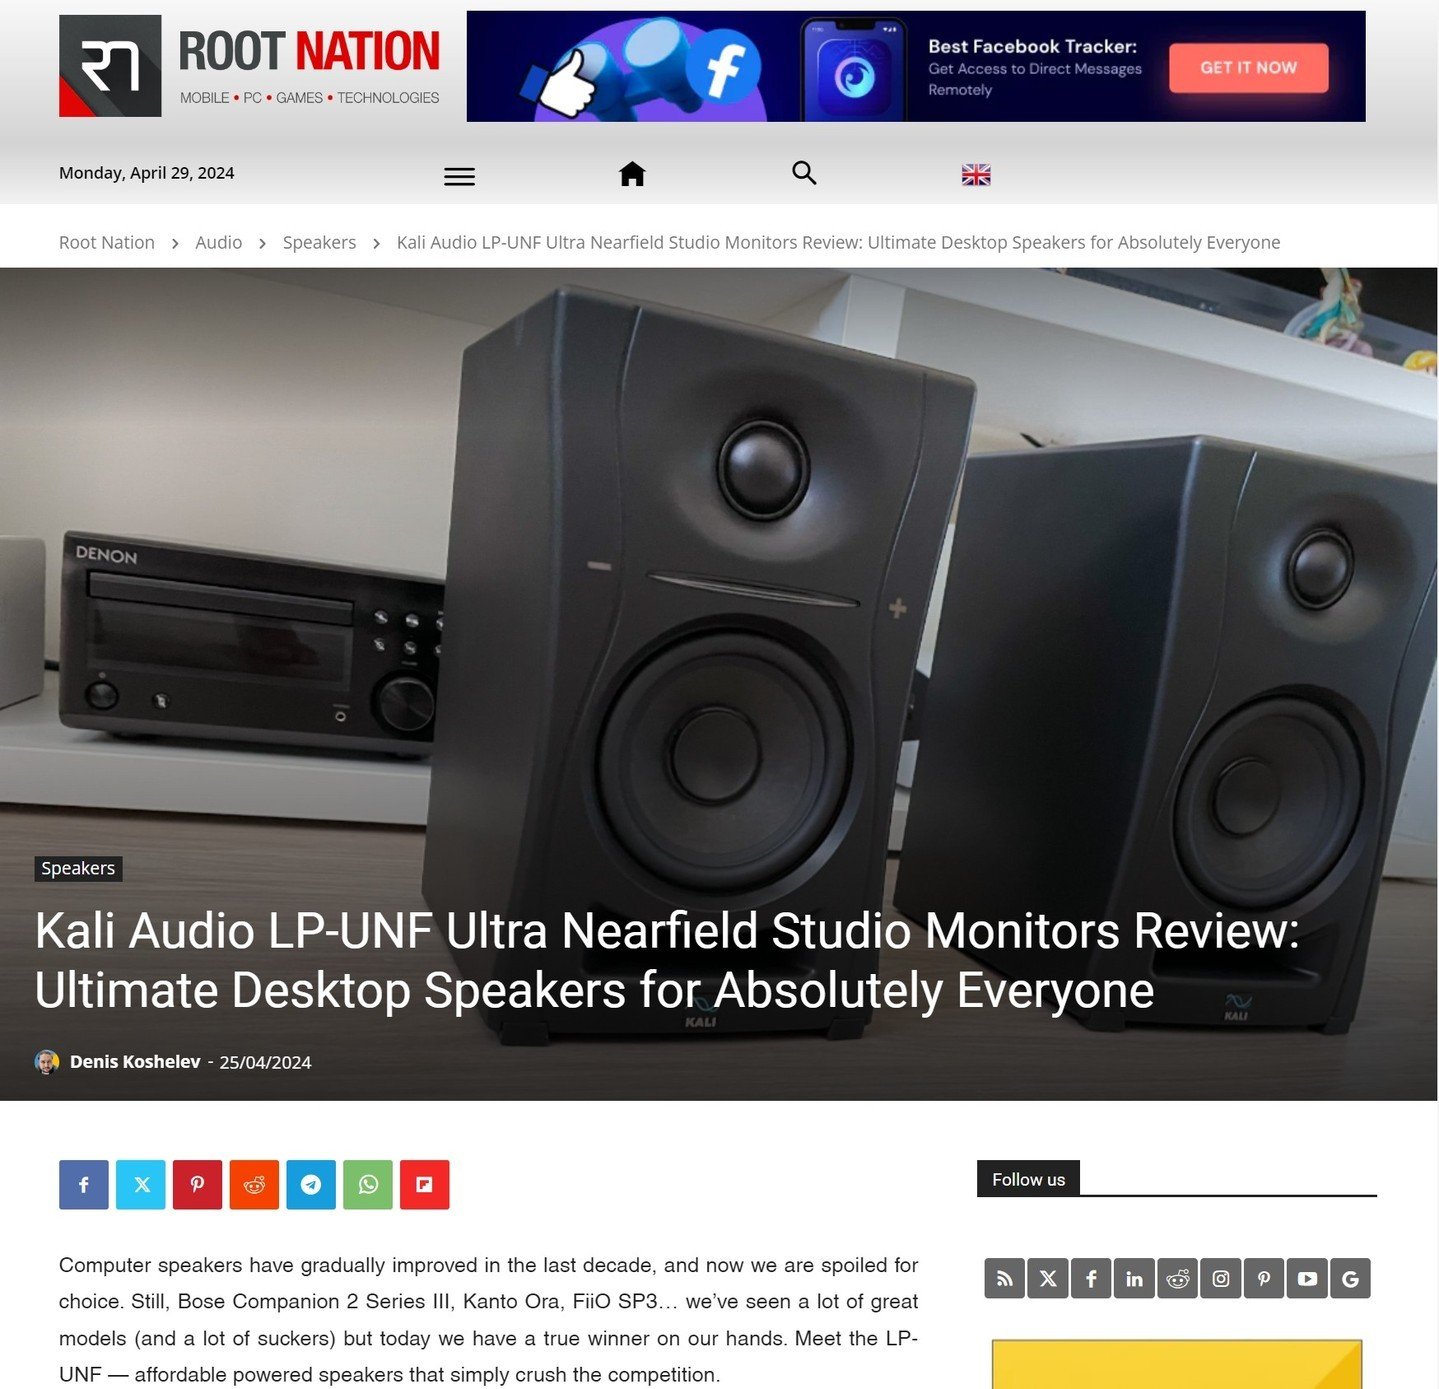 &quot;I will scream their praises from the rooftops. These are simply the best there is for this price. The Kali Audio LP-UNF will probably beat a lot of the more expensive speakers, too.&quot; ⁠
⁠
Link in bio for the full review article from our fri